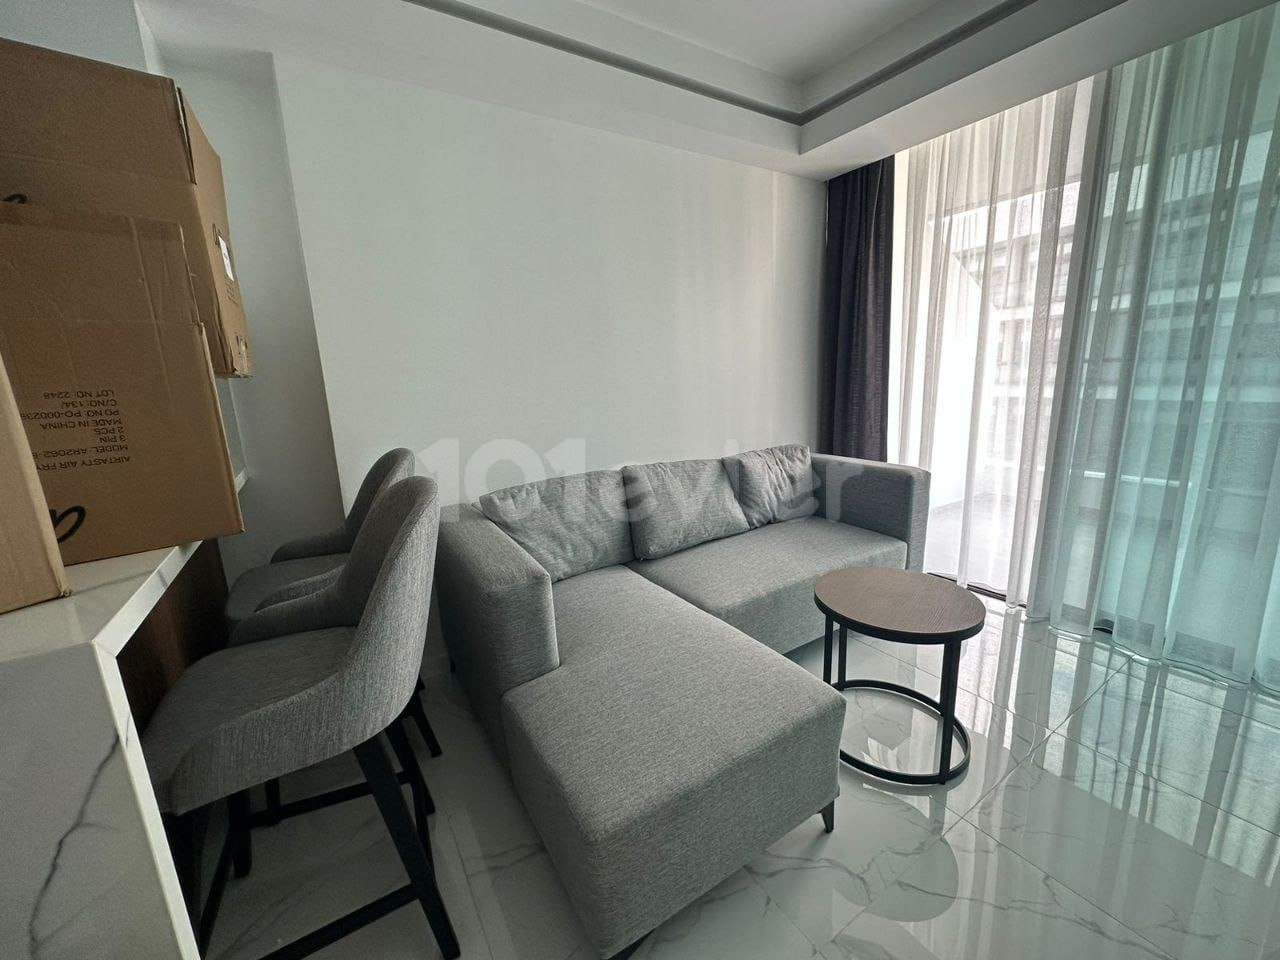 GRAND SAPPHİRE IN İSKELE 1+1 FULLY FURNISHED FLAT